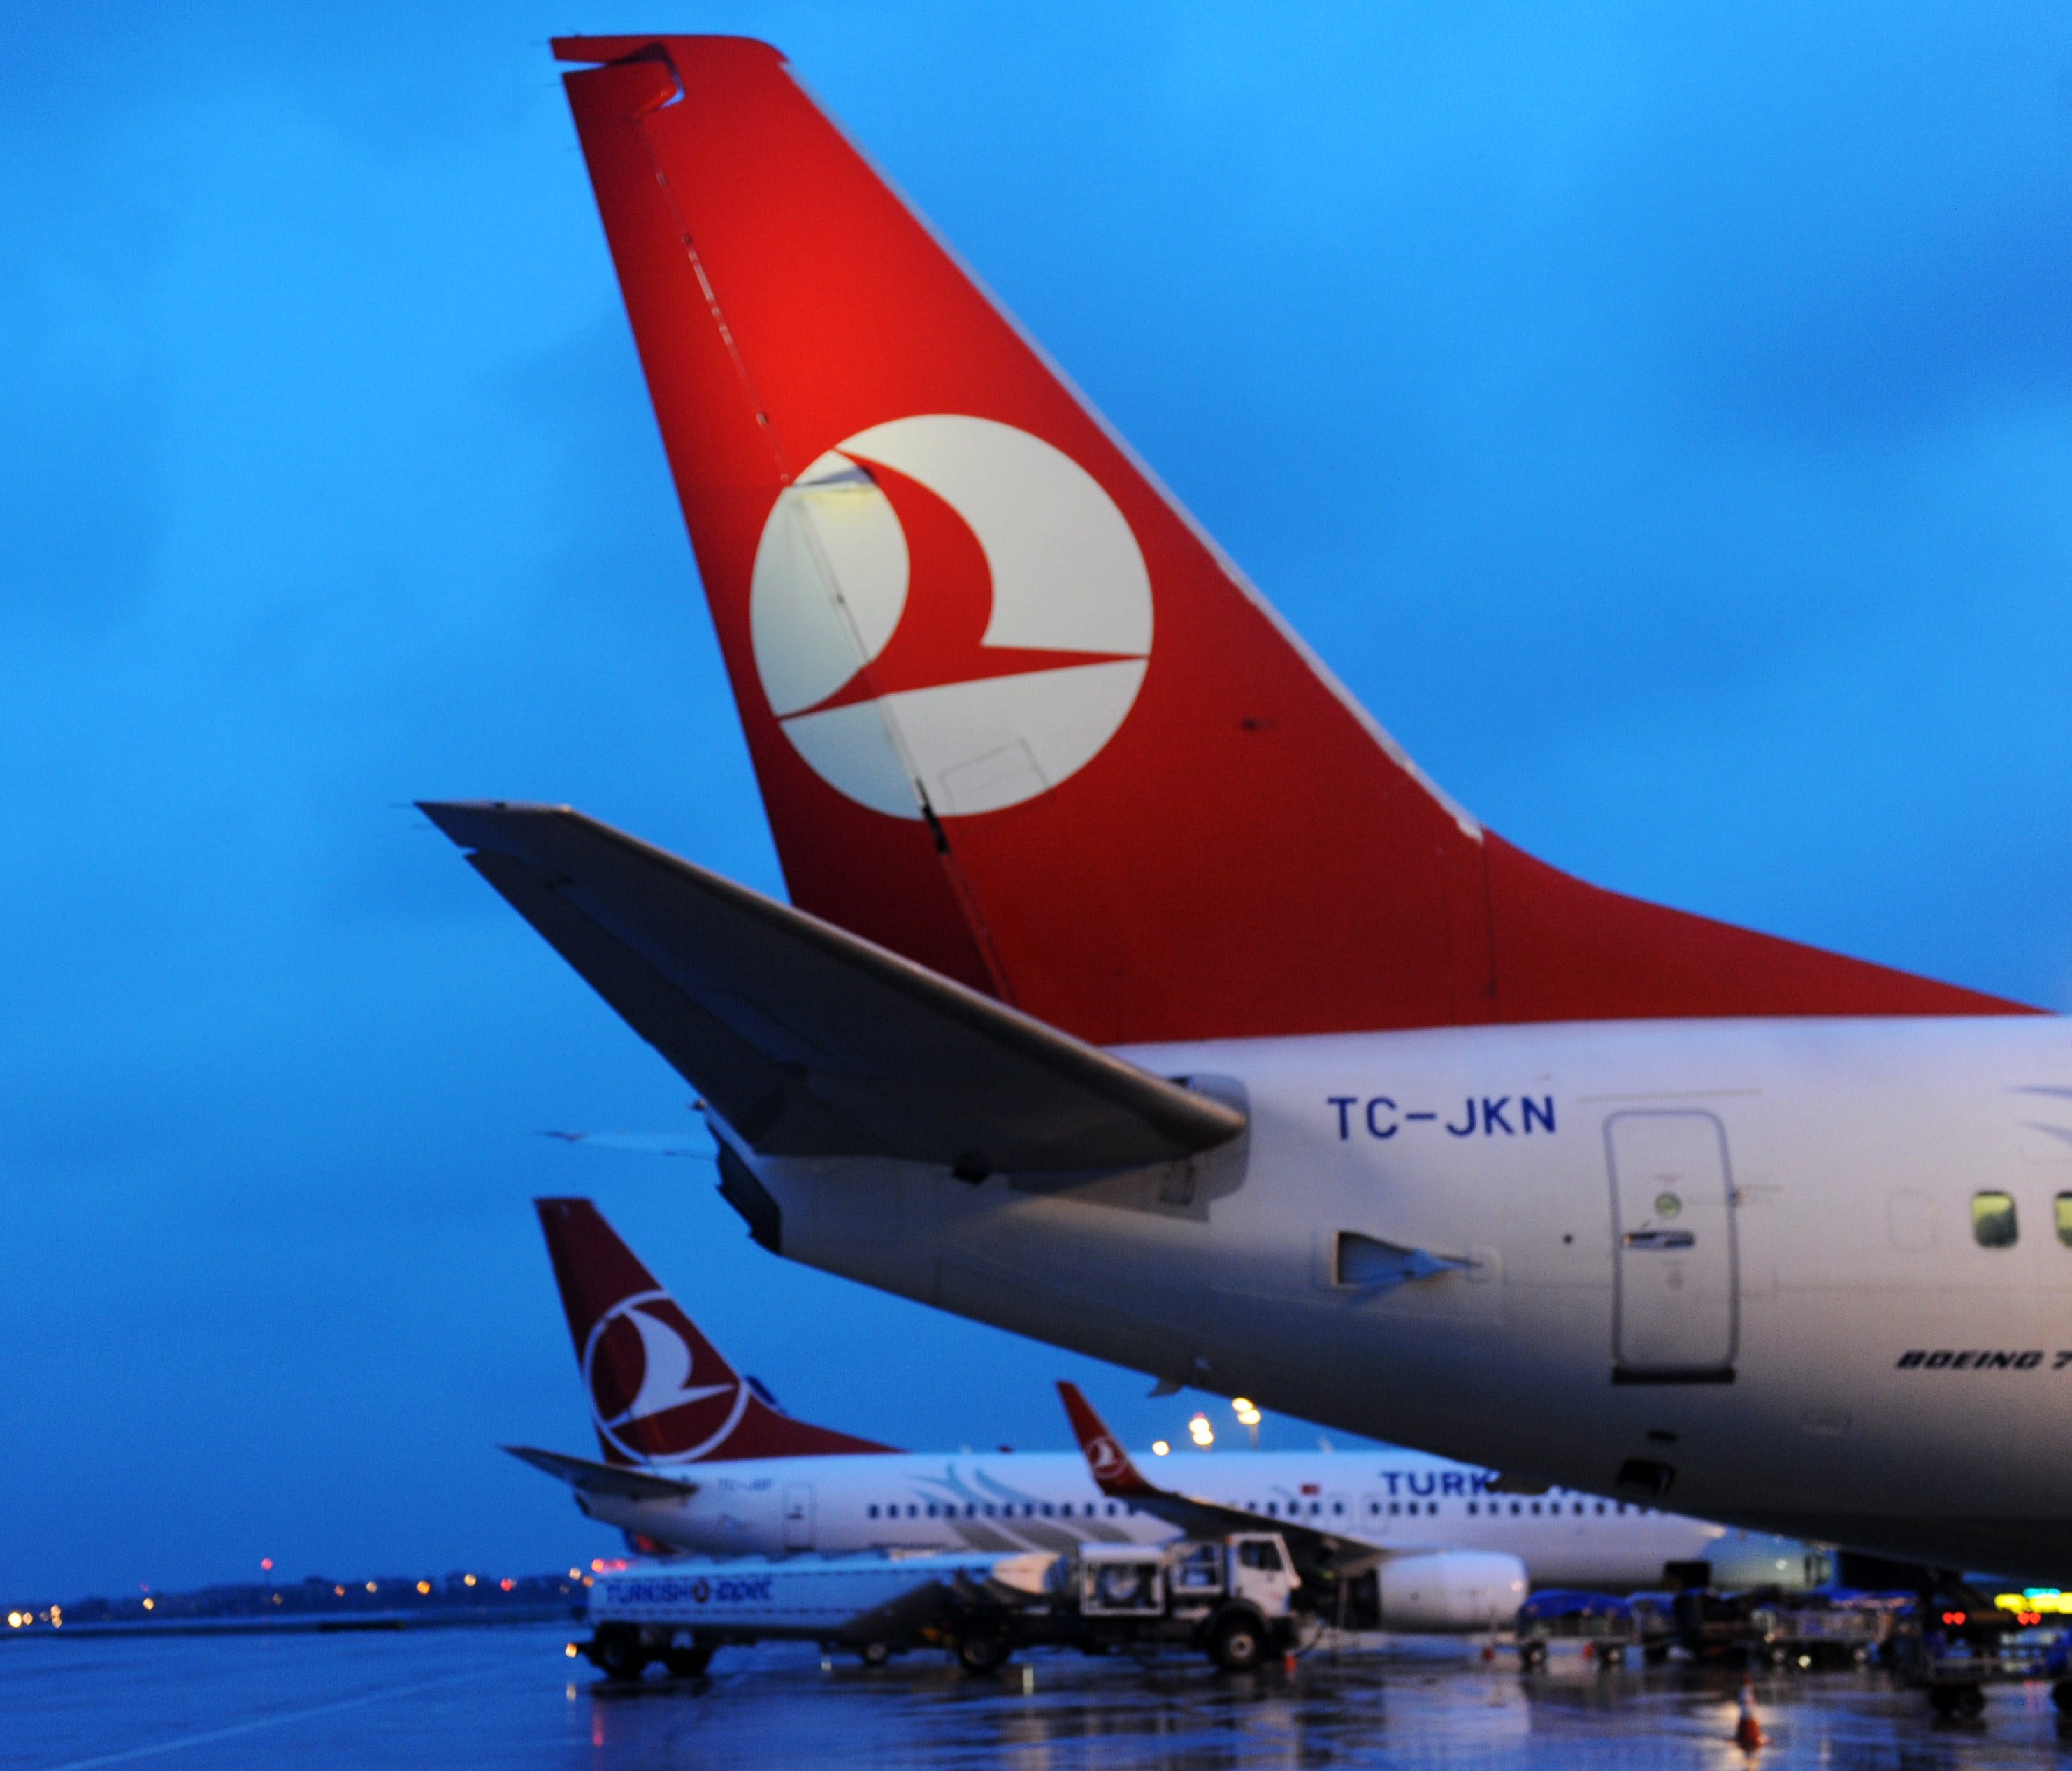 This file photo from March 16, 2013, shows a Turkish Airlines planes at the Ataturk Airport in Istanbul.